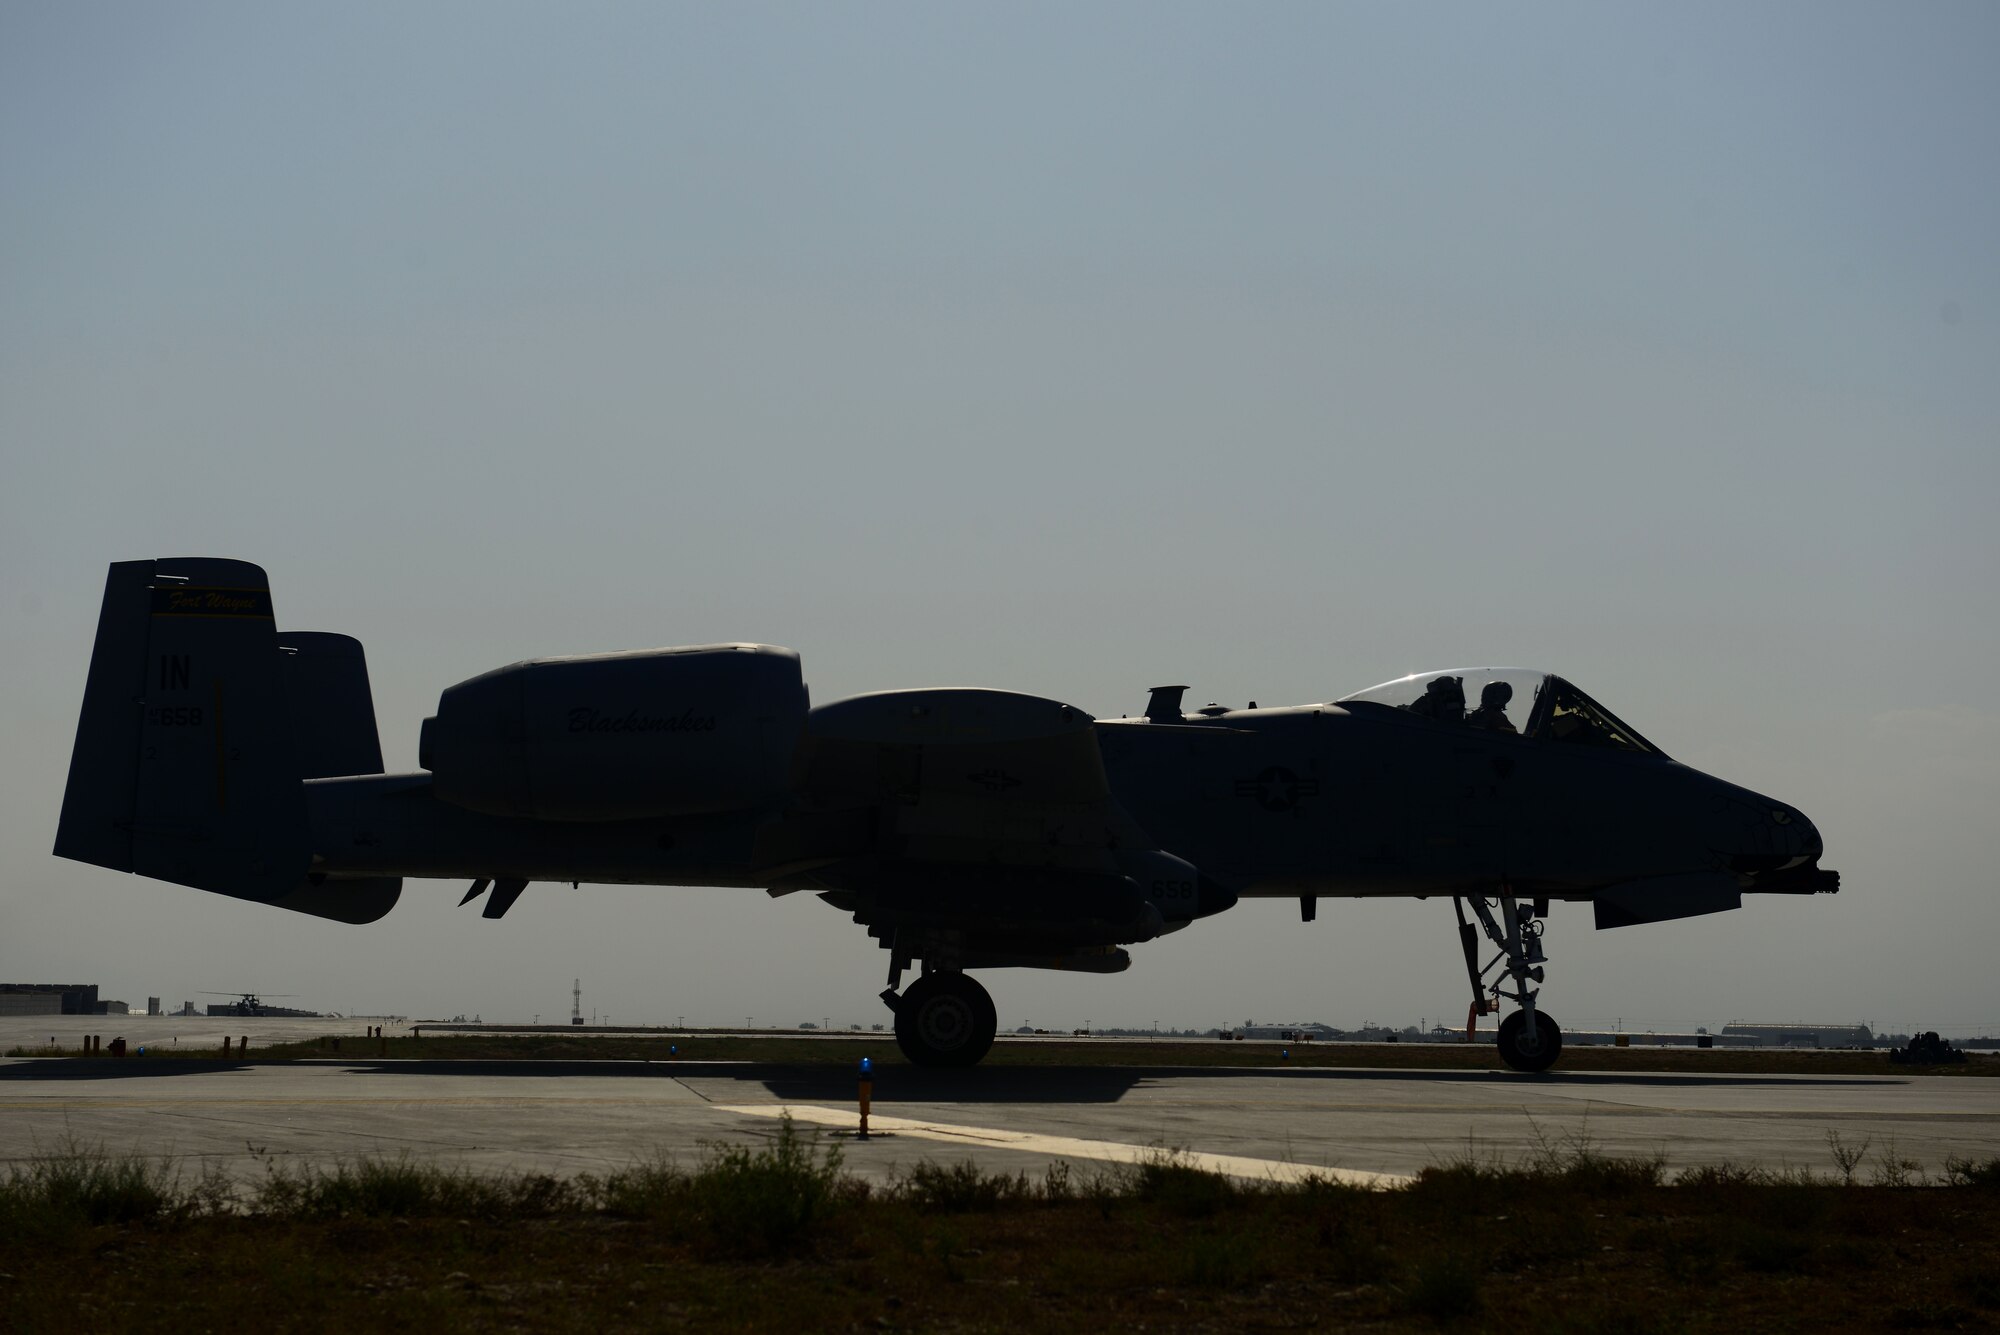 A U.S. Air Force A-10 Thunderbolt prepares for take off at Bagram Airfield, Afghanistan Oct. 24, 2014.  Deployed service members help operate 46 different types of aircraft in-and-out of the buisiest single runway airfield in the Department of Defense. (U.S. Air Force photo by Staff Sgt. Evelyn Chavez/Released)